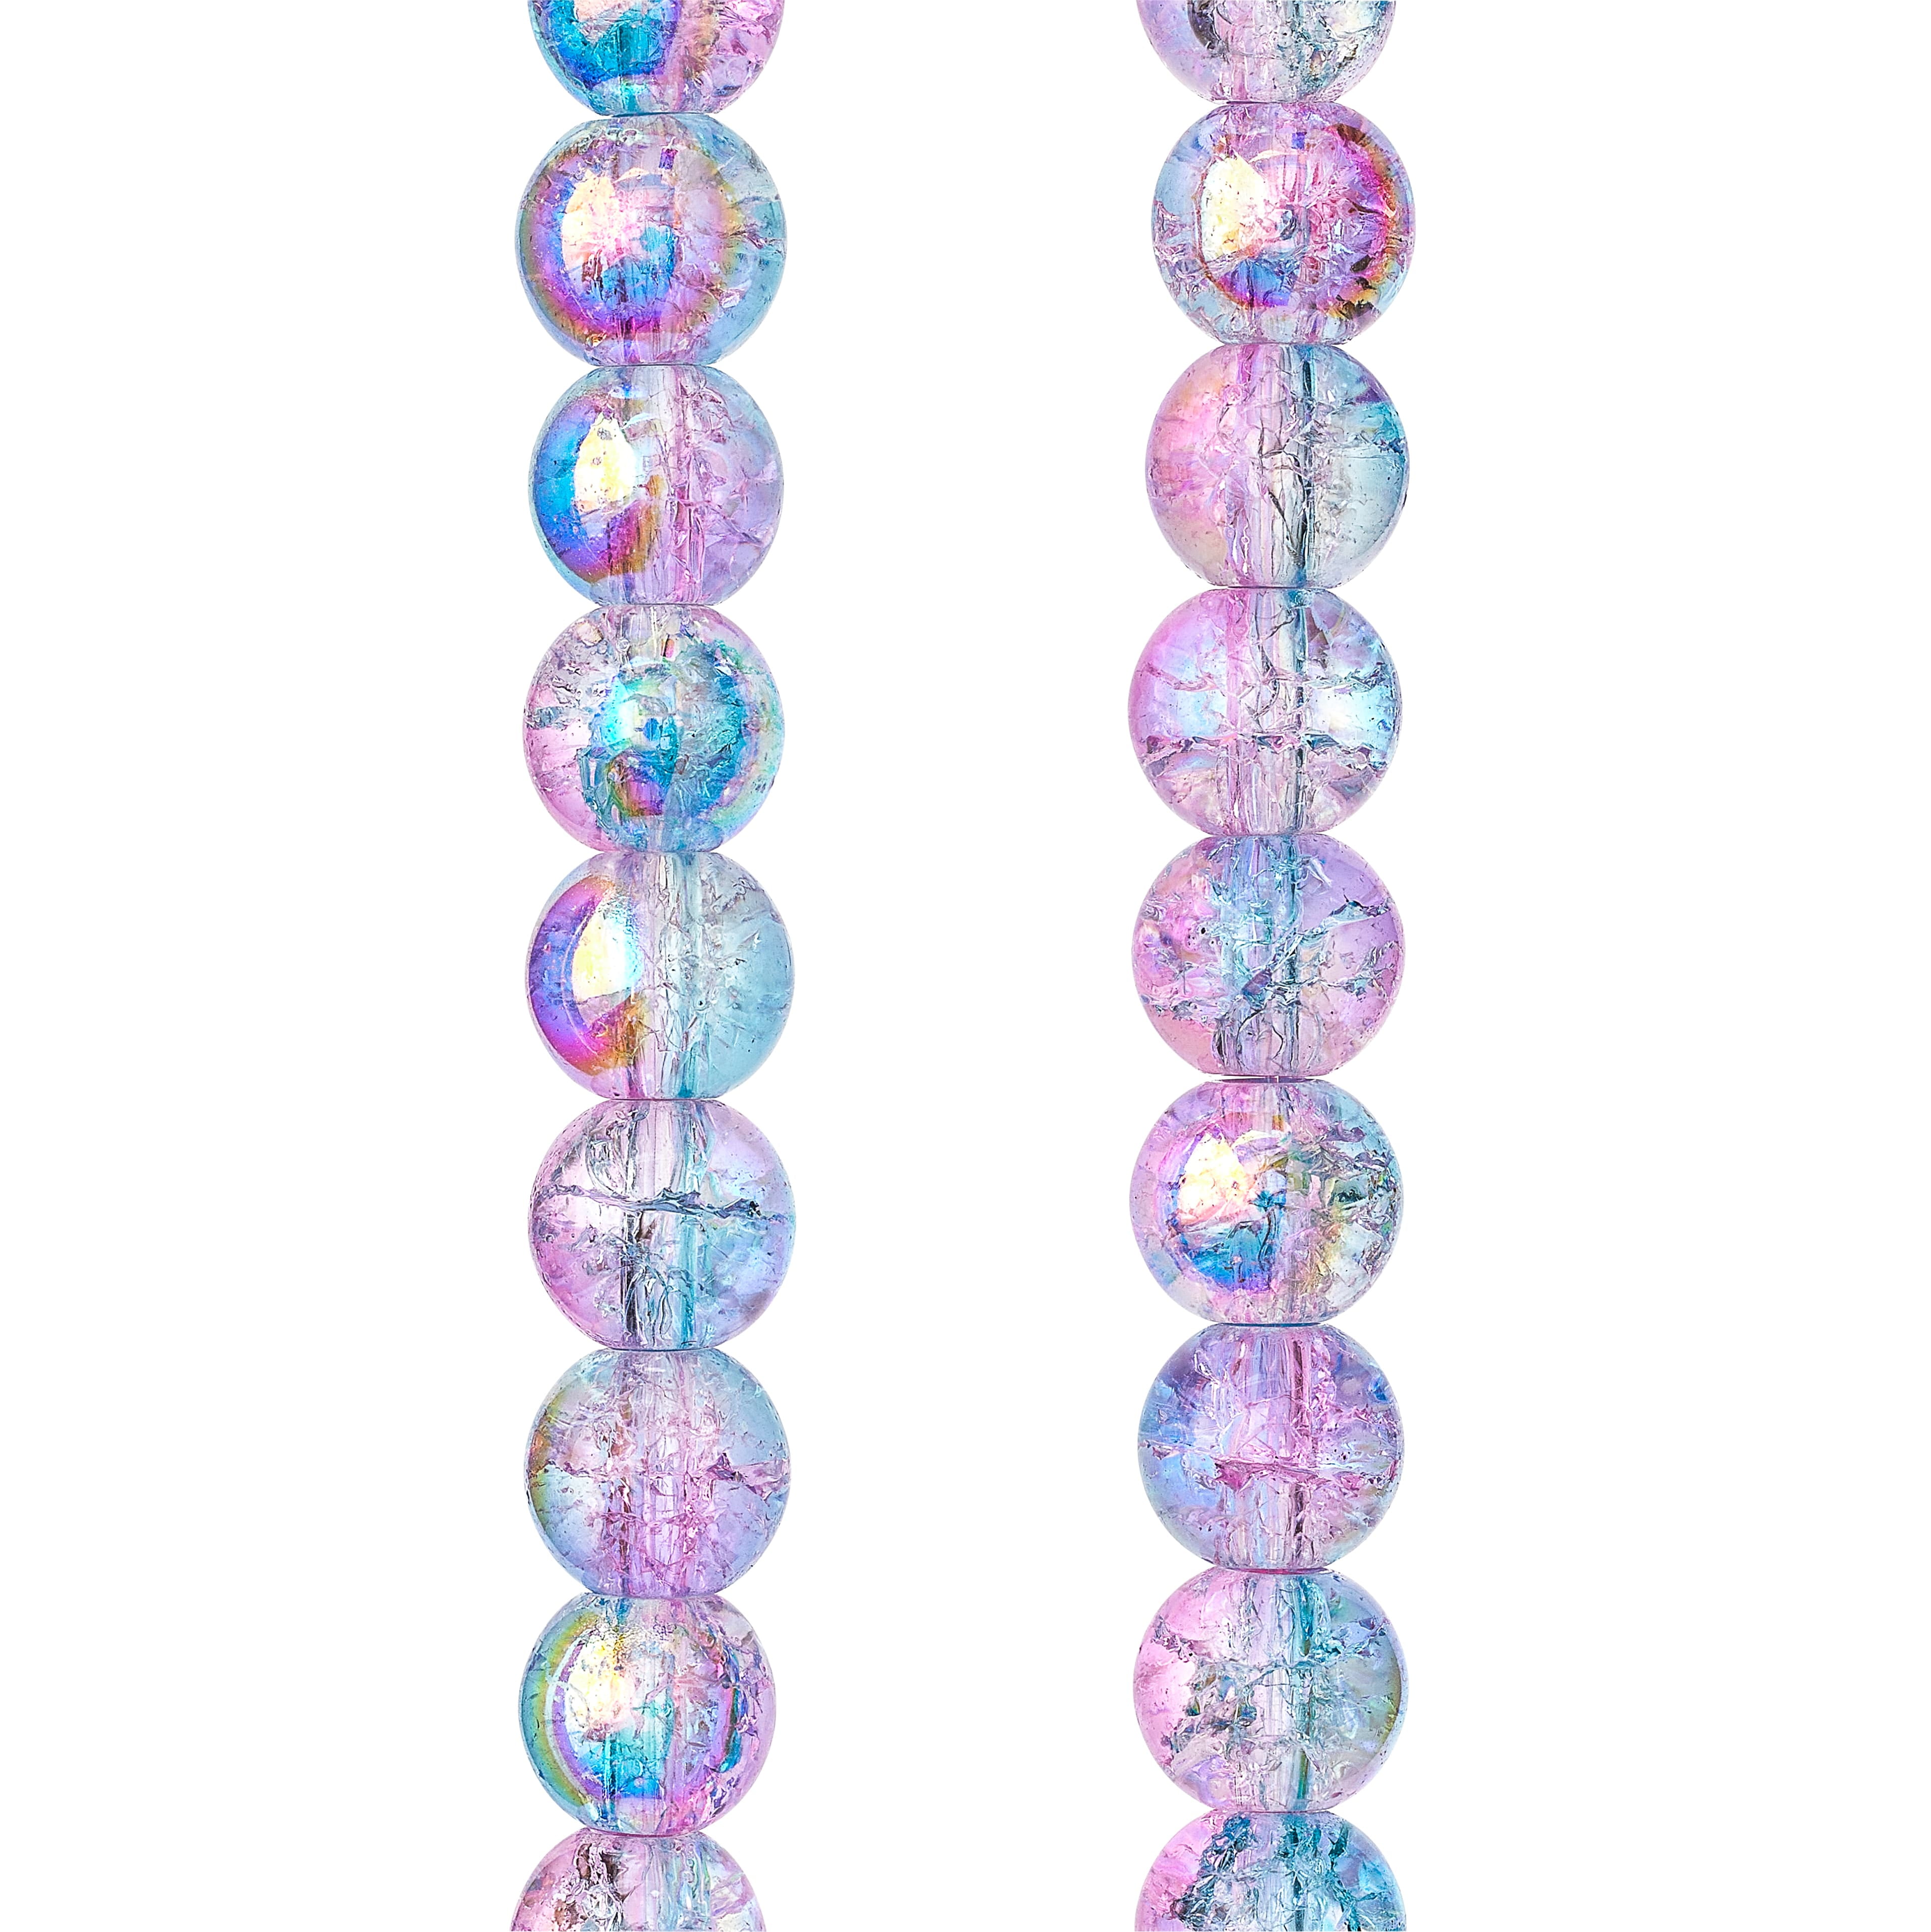 Mixed Beads Strand Necklace Purple/Blue Paddle Board